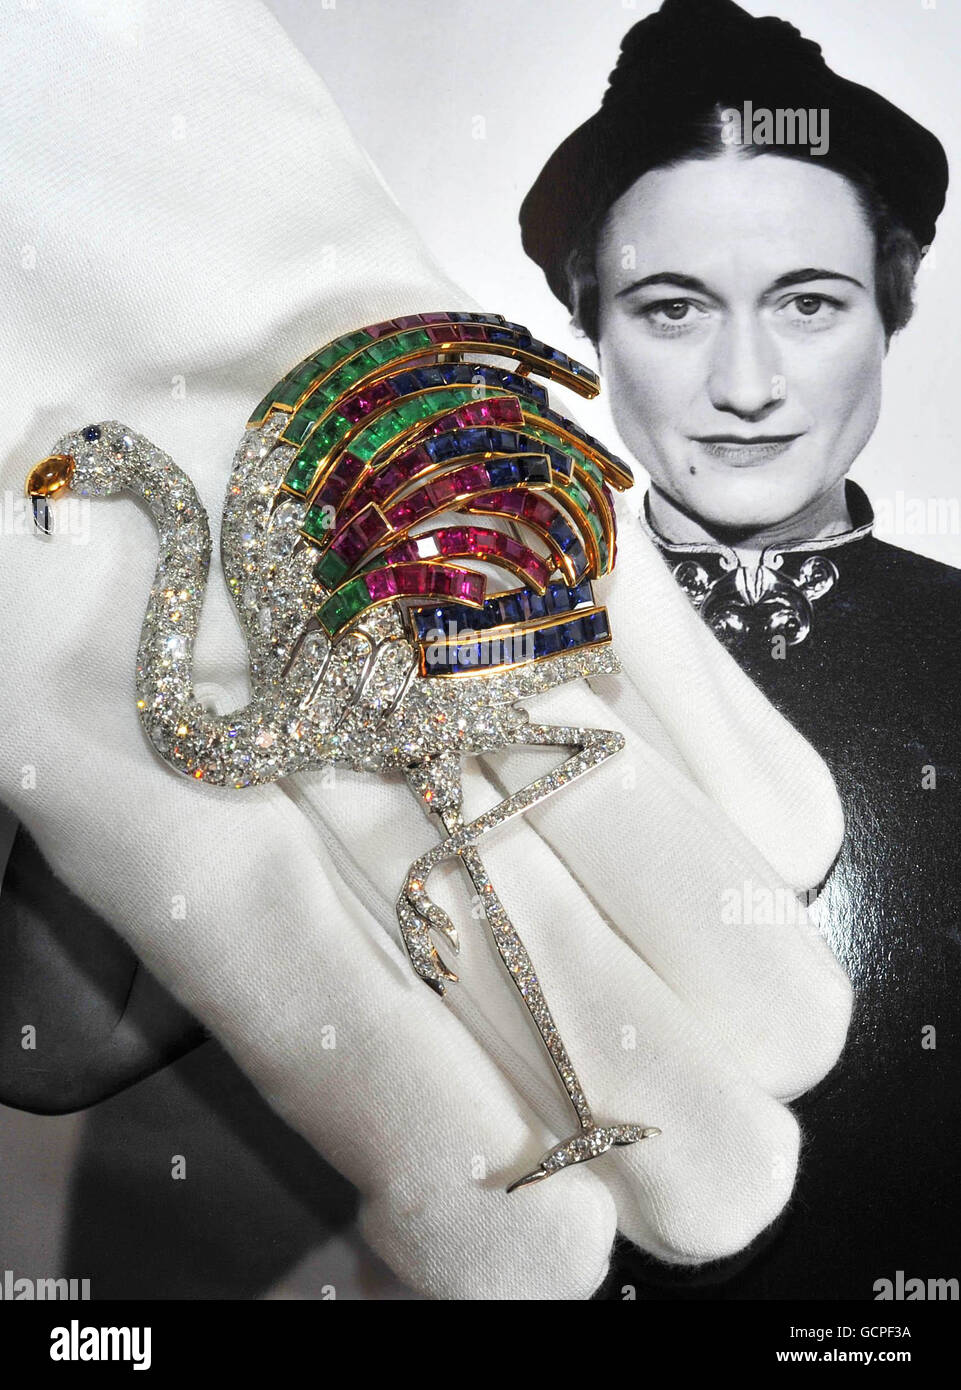 The ruby, sapphire, emerald citrine and diamond, Flamingo Clip, mounted by Cartier in 1940, which is valued from 1m to 1.5m and forms part of a collection of the Jewels of the Duchess of Windsor at Sotheby's in London. Stock Photo